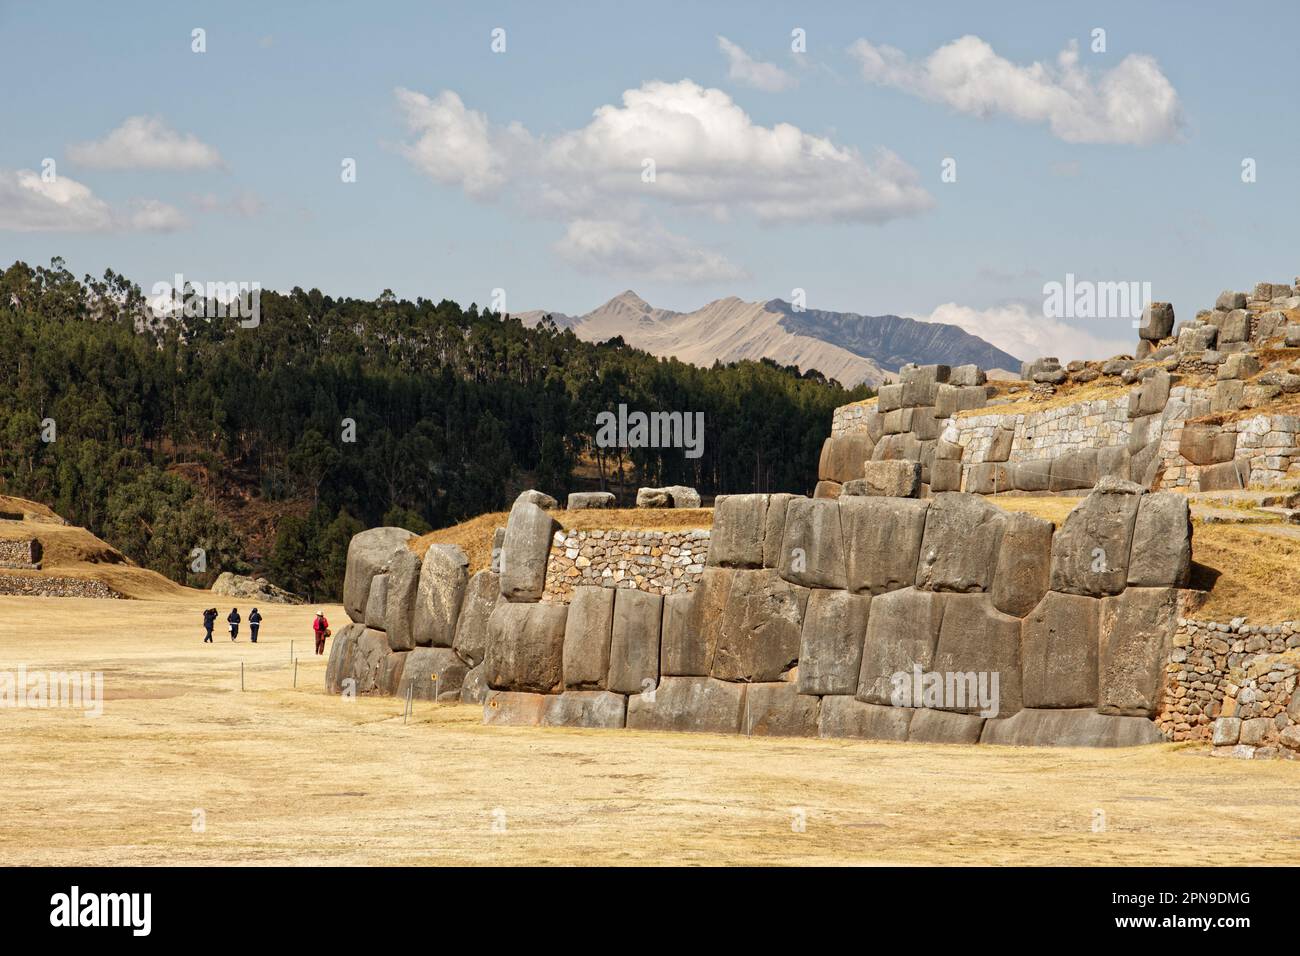 The dry walls of Saqsaywaman (AKA Sacsayhuamán or Xacxaguaman), a citadel built by the Incas in the 15th century, on the northern outskirts of Cusco Stock Photo